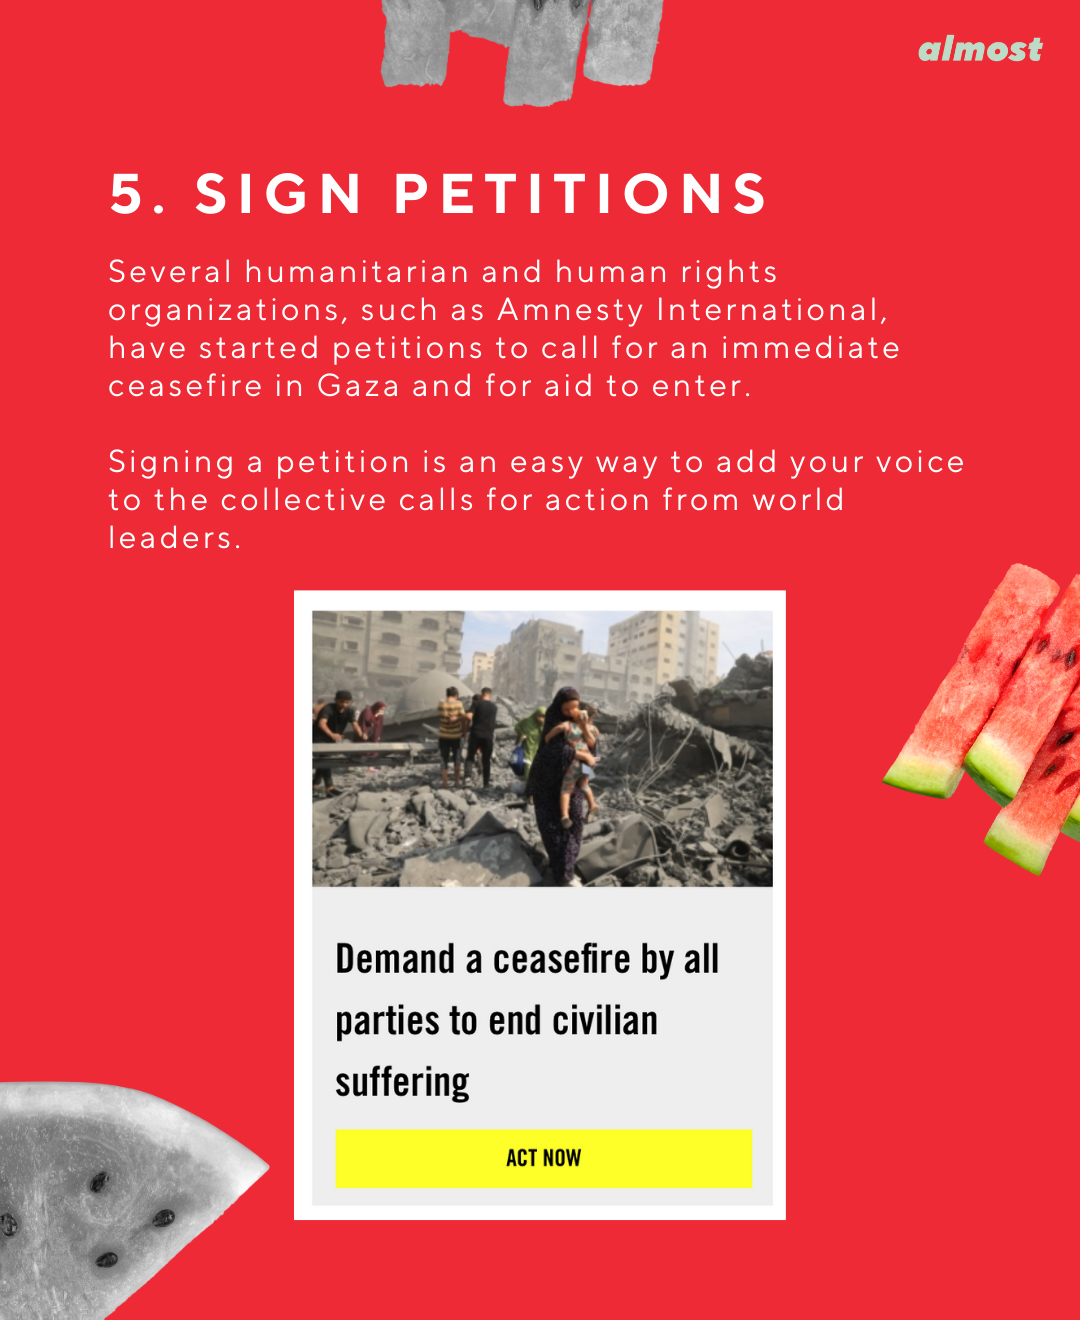 help gaza sign petition